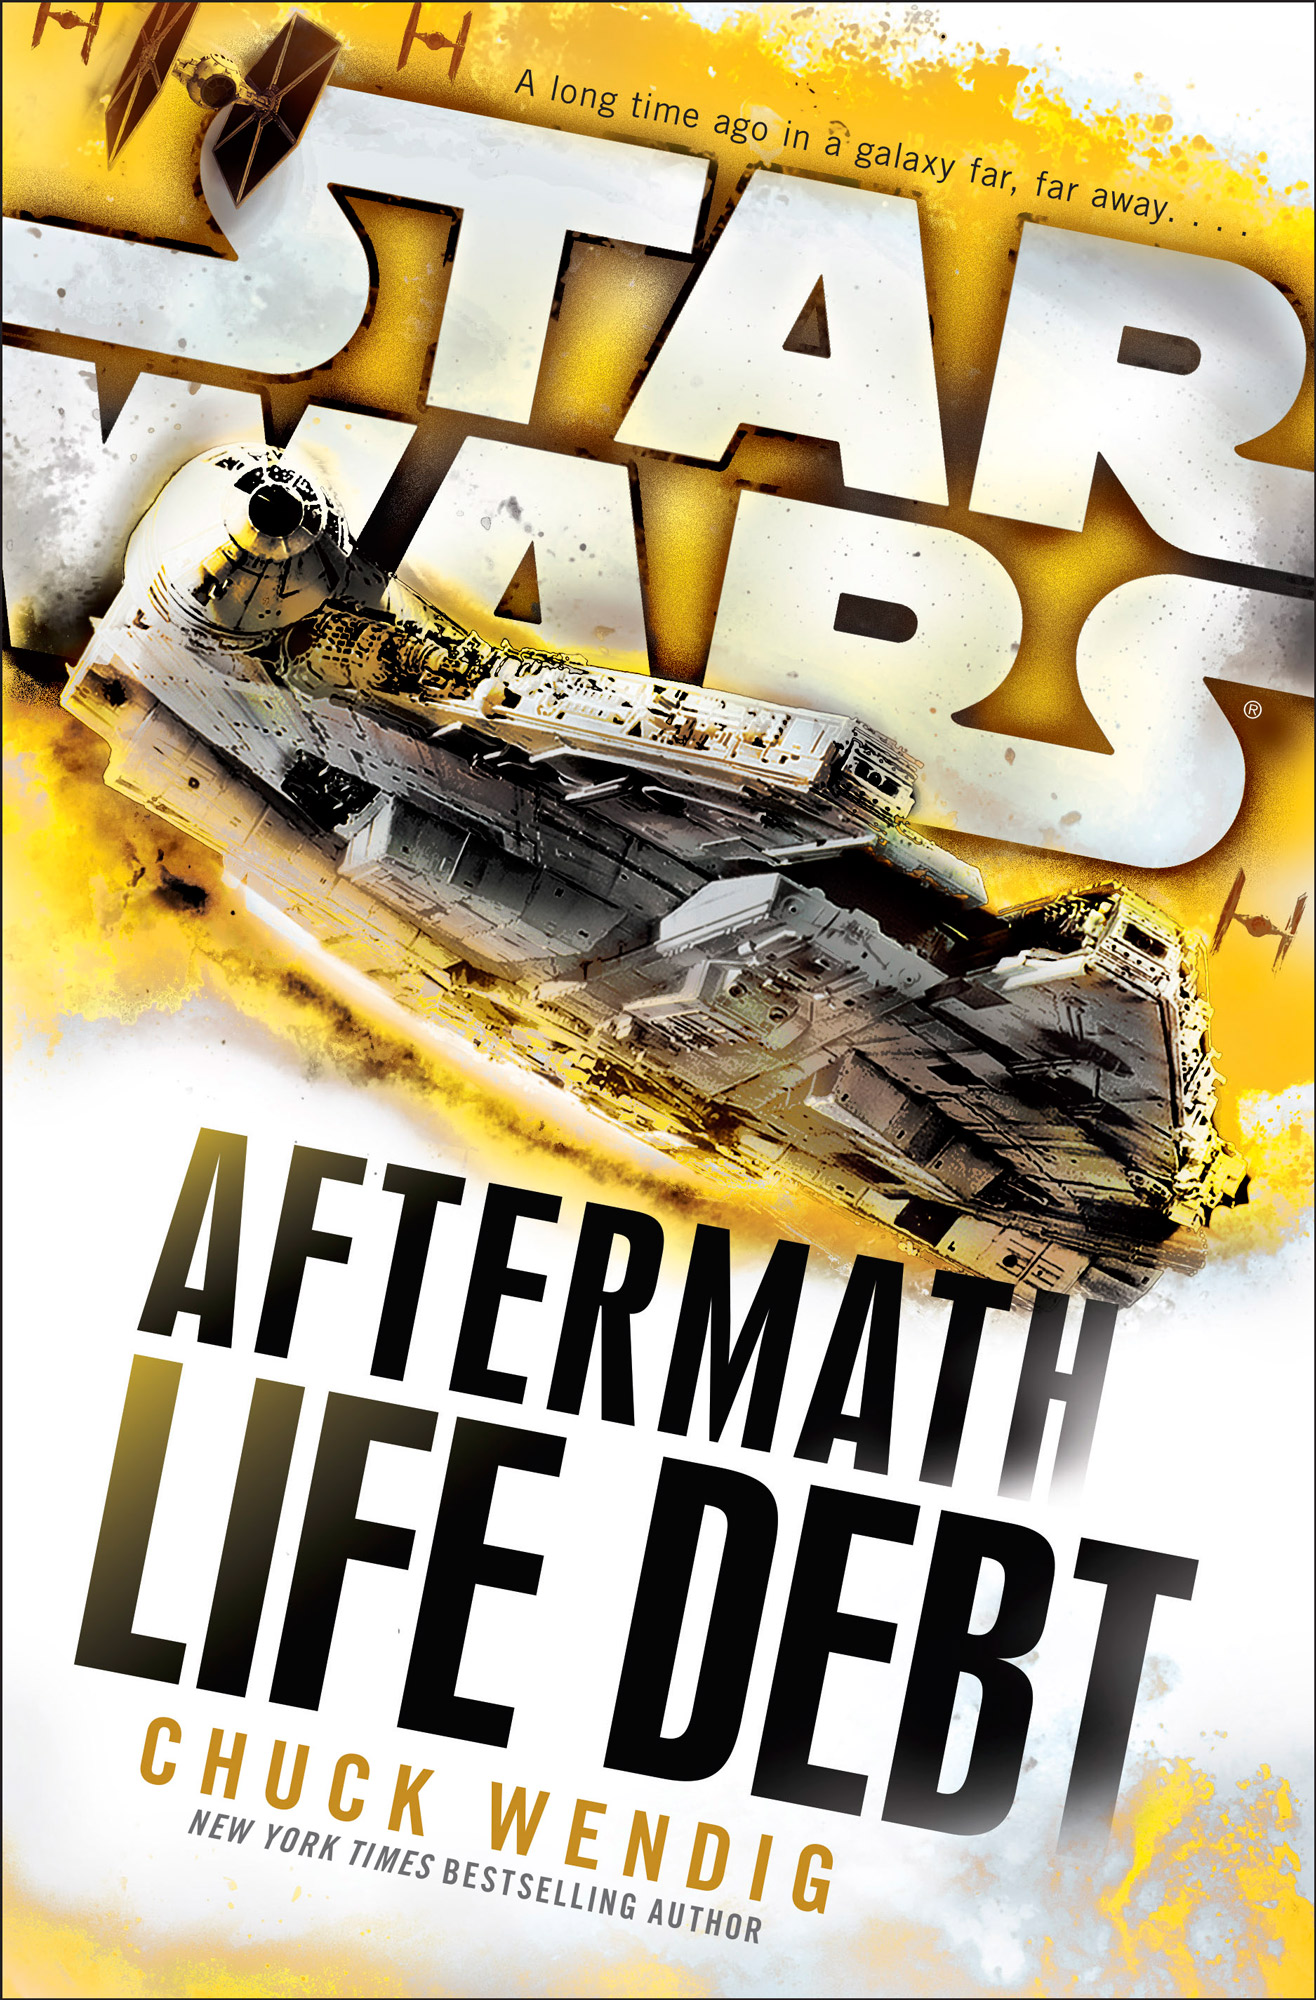 Friday Reads: Star Wars: Aftermath – Life Debt by Chuck Wendig